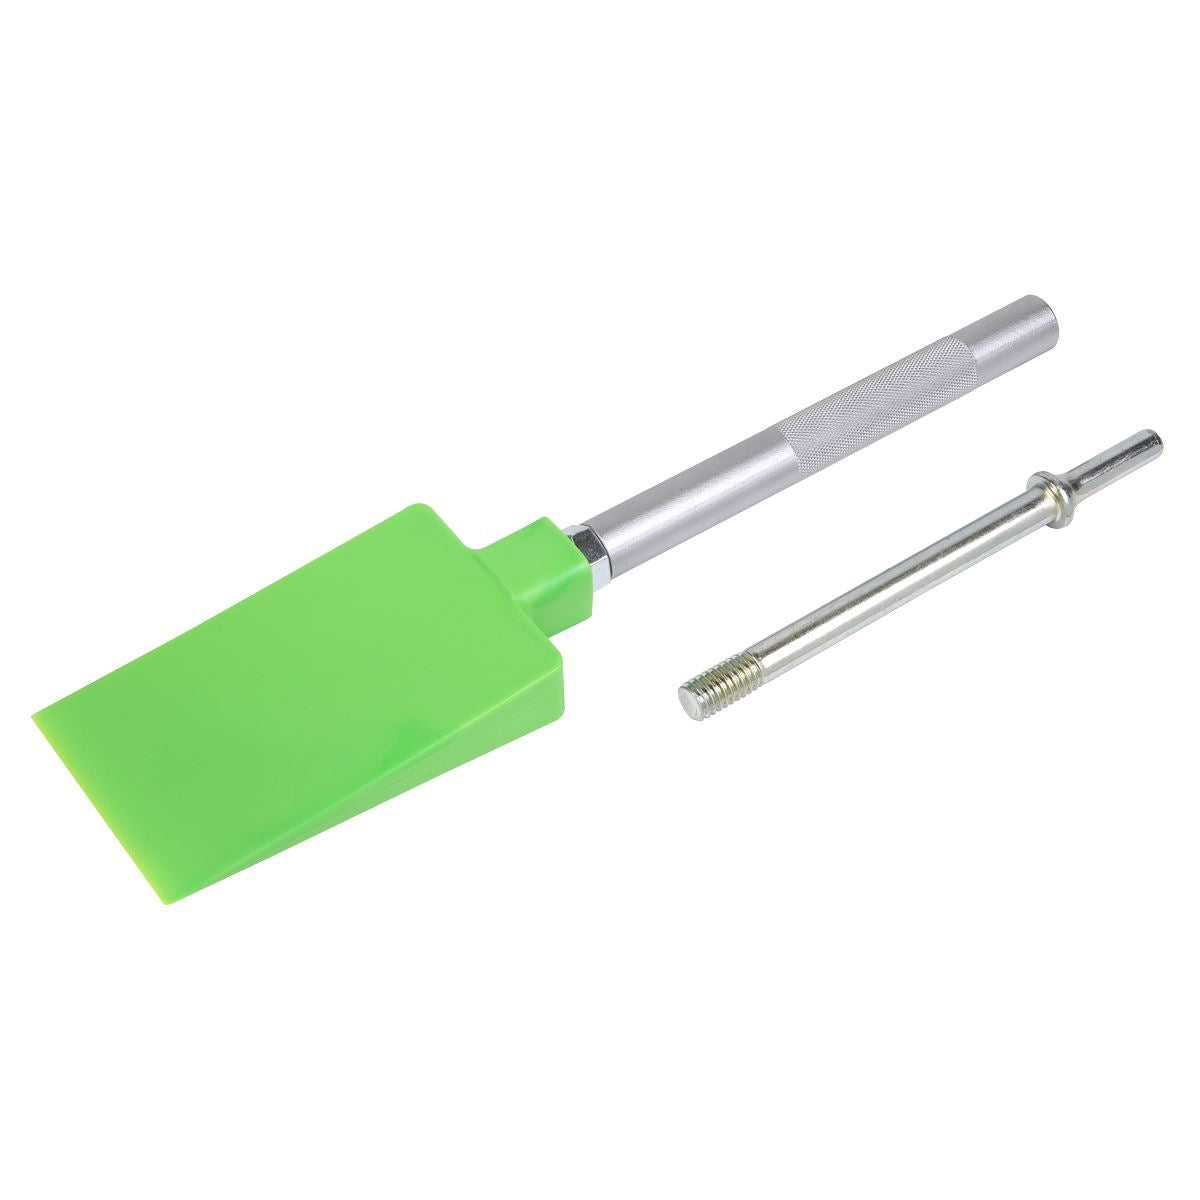 Sealey Removal Tool Moulding/Trim